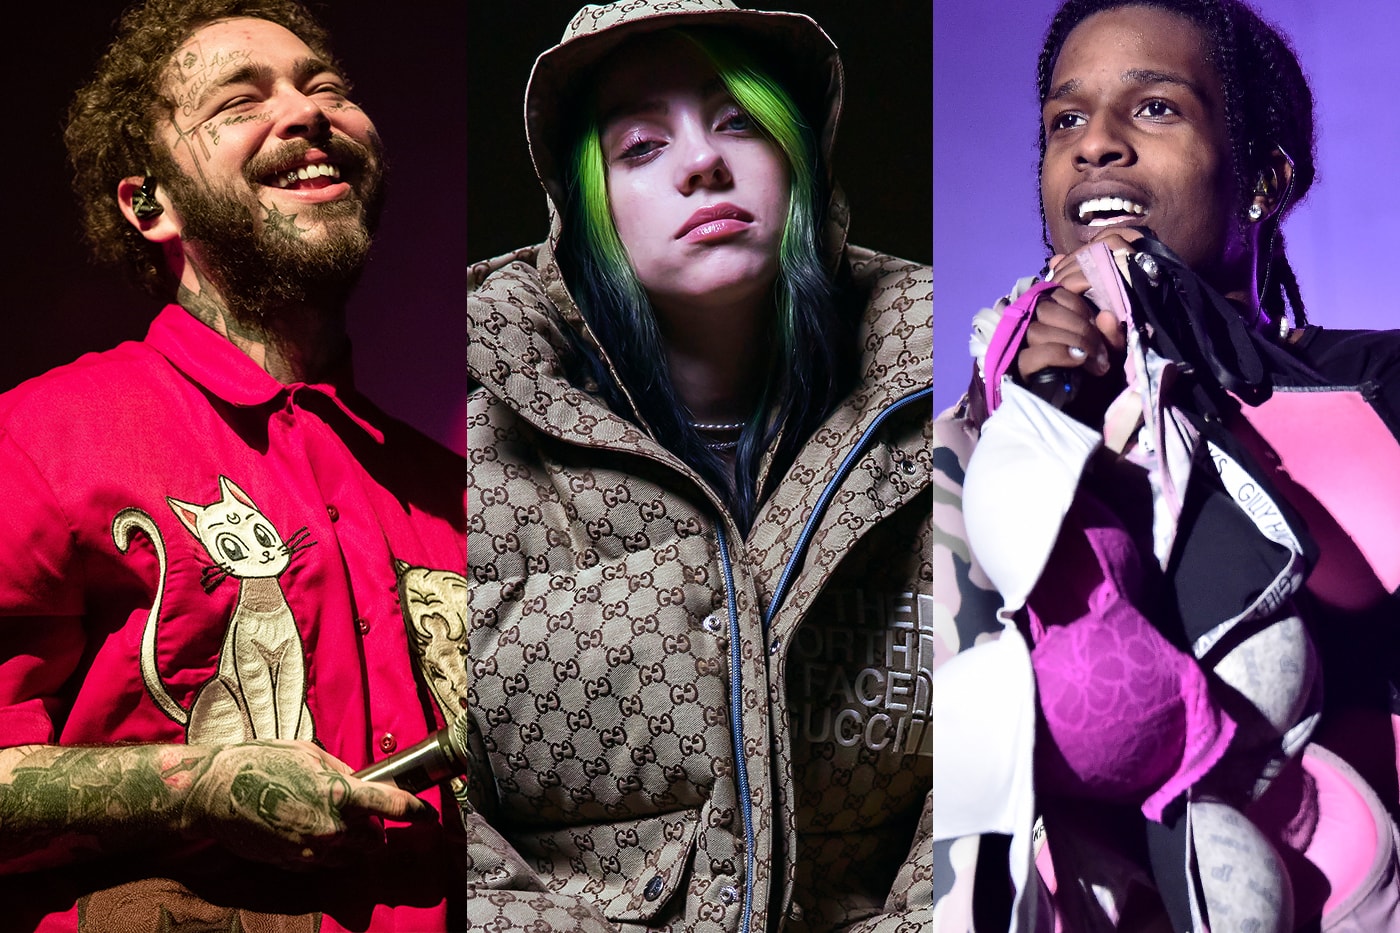 Billie Eilish, A$AP Rocky, J Balvin, and Post Malone Will Headline NYC's Governors Ball 2021 Music Festival